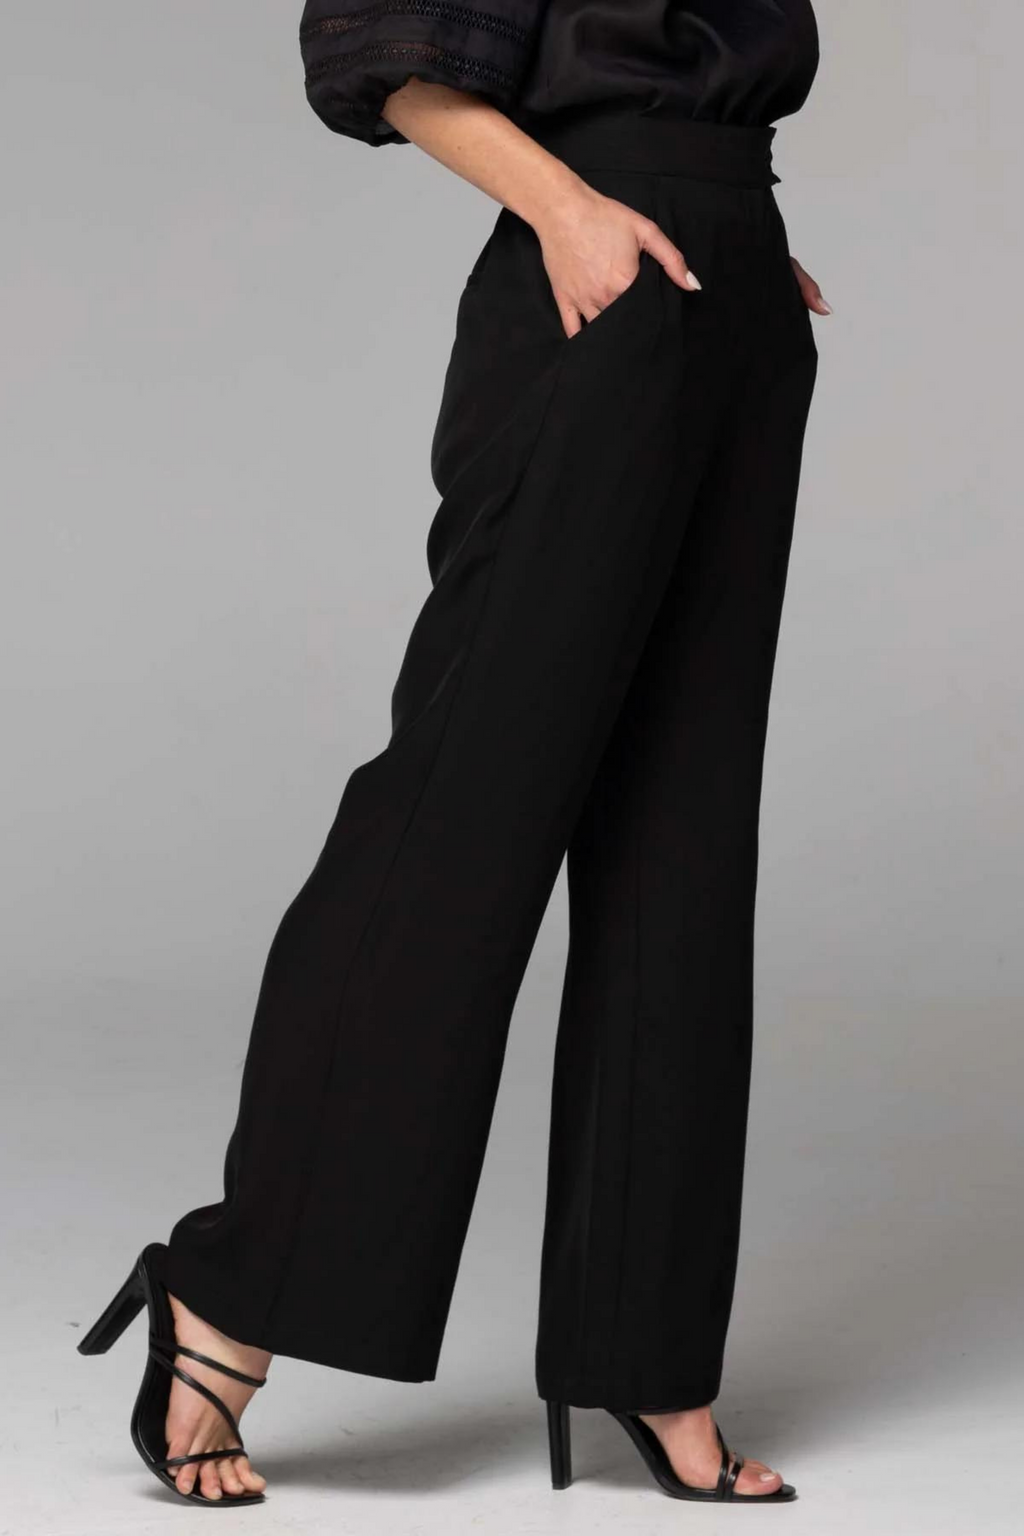 HEART AND SOUL FLARE PANT - Black